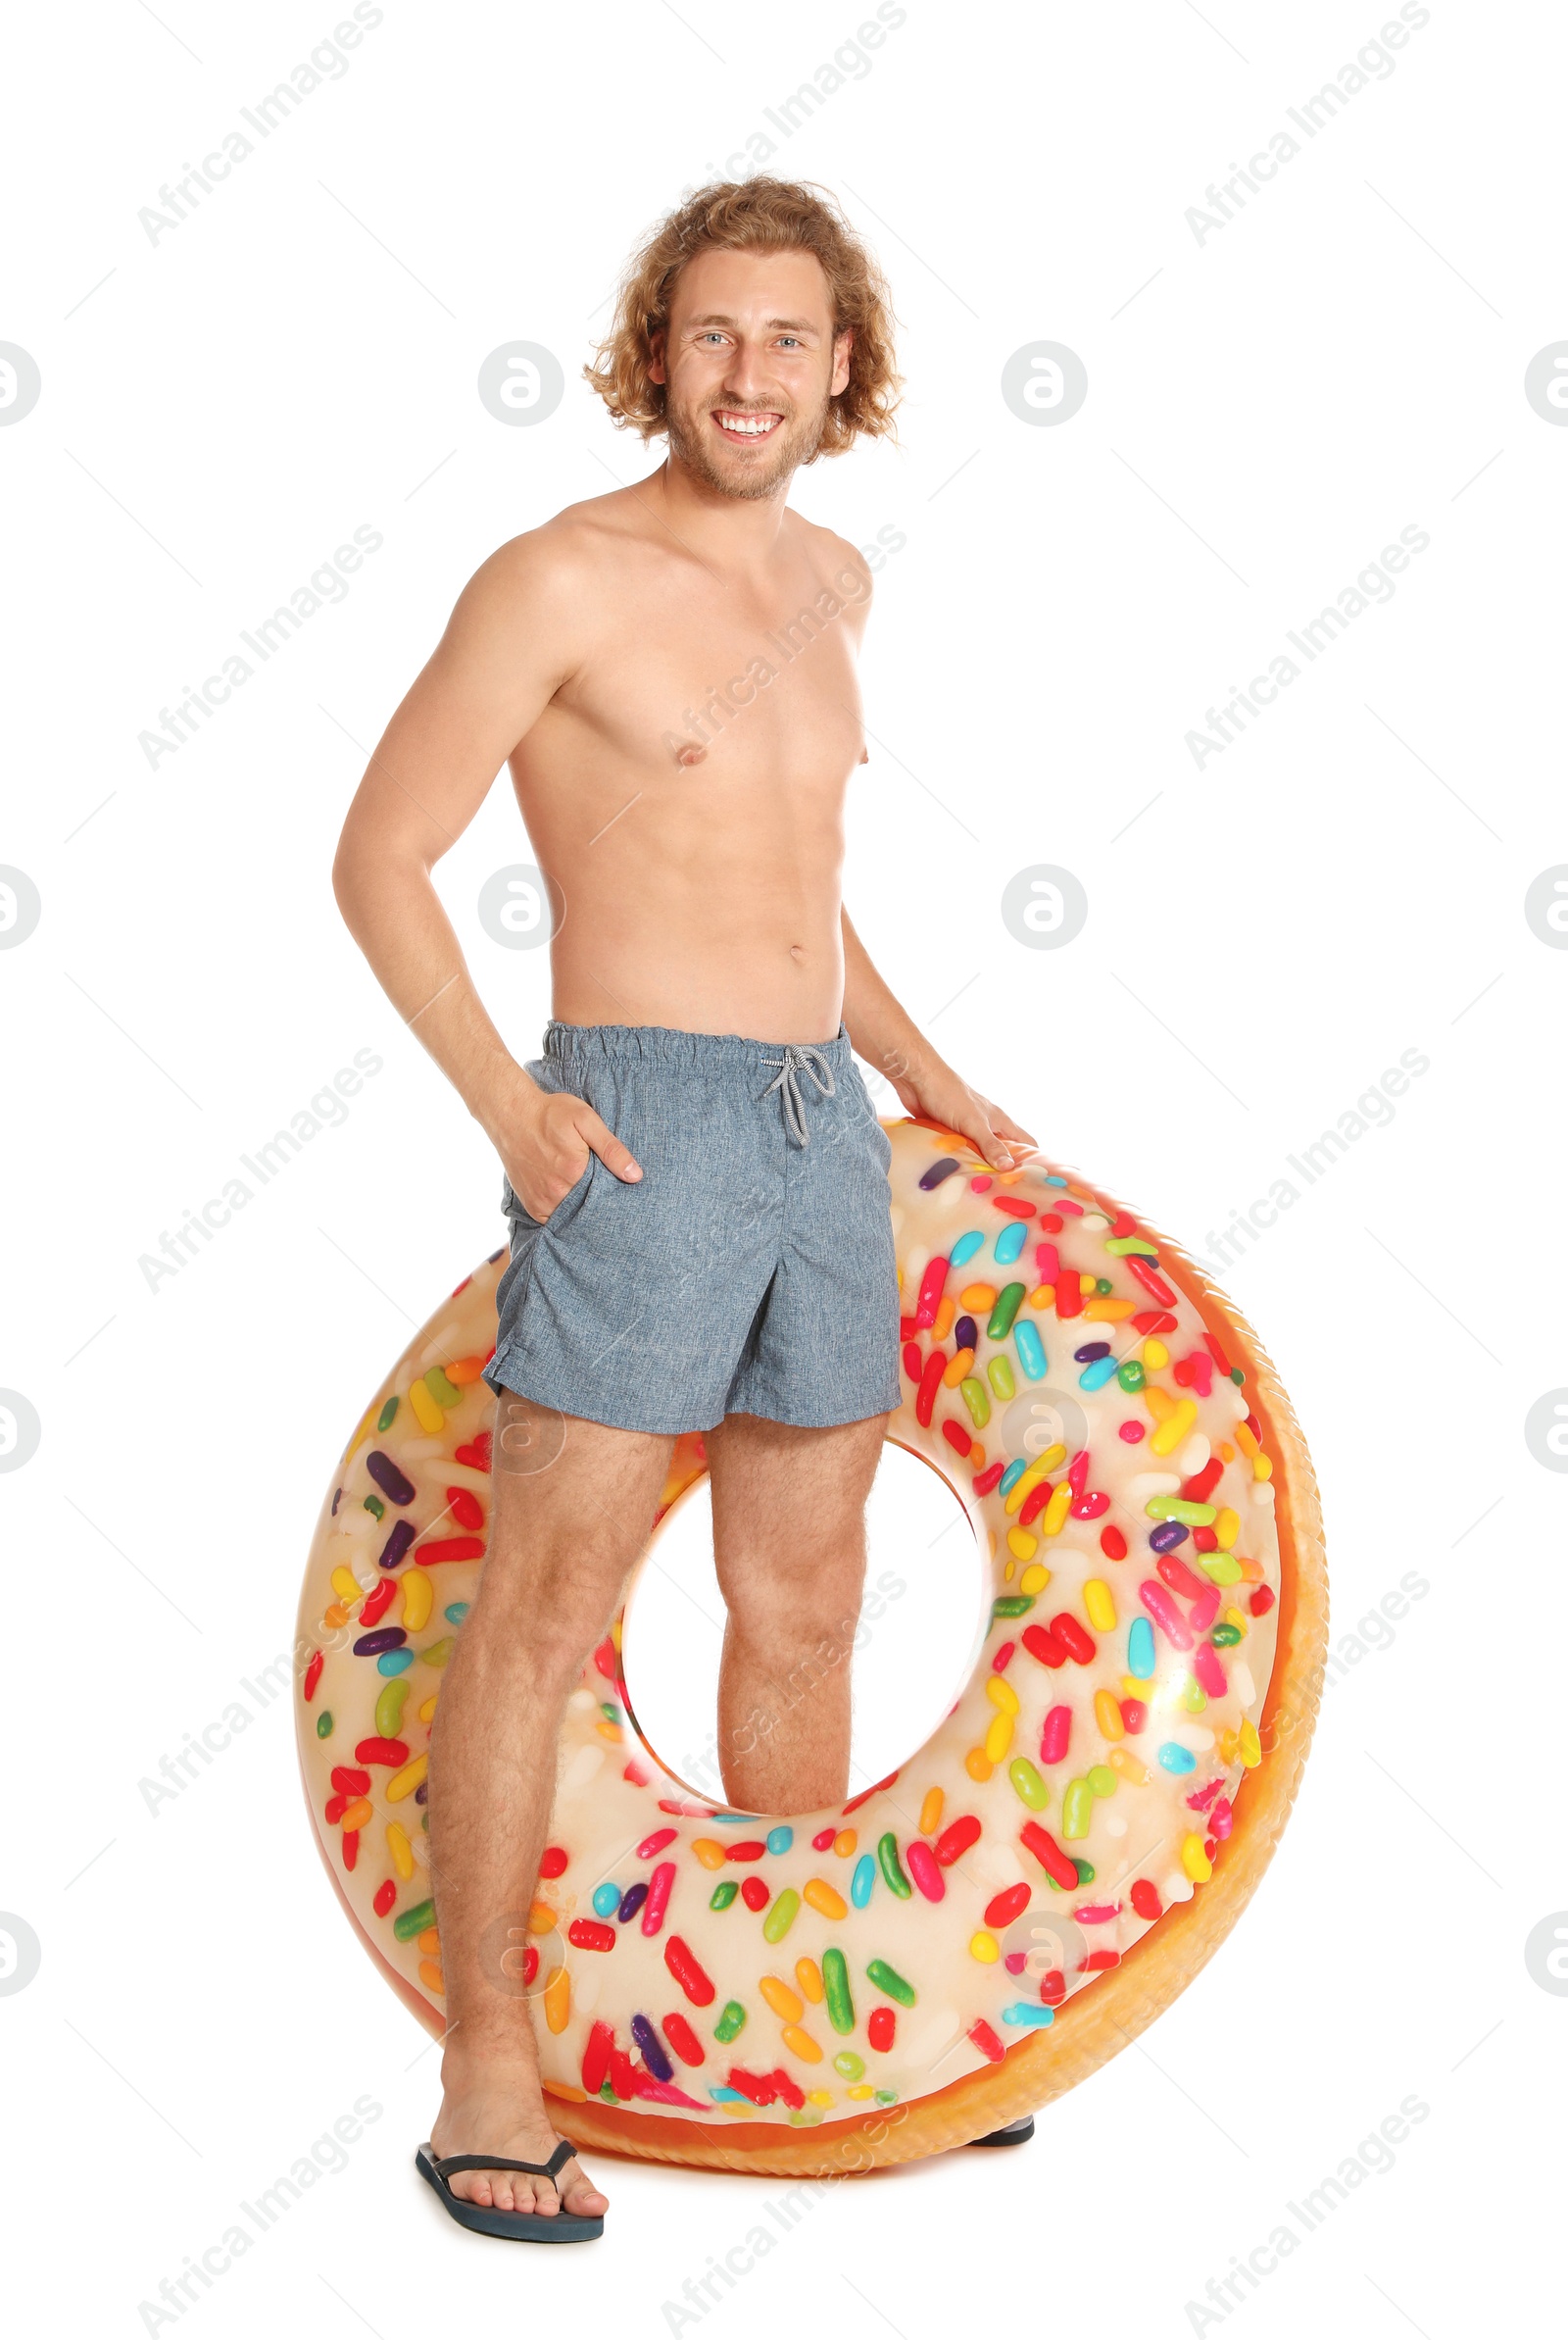 Photo of Attractive young man in swimwear with doughnut inflatable ring on white background